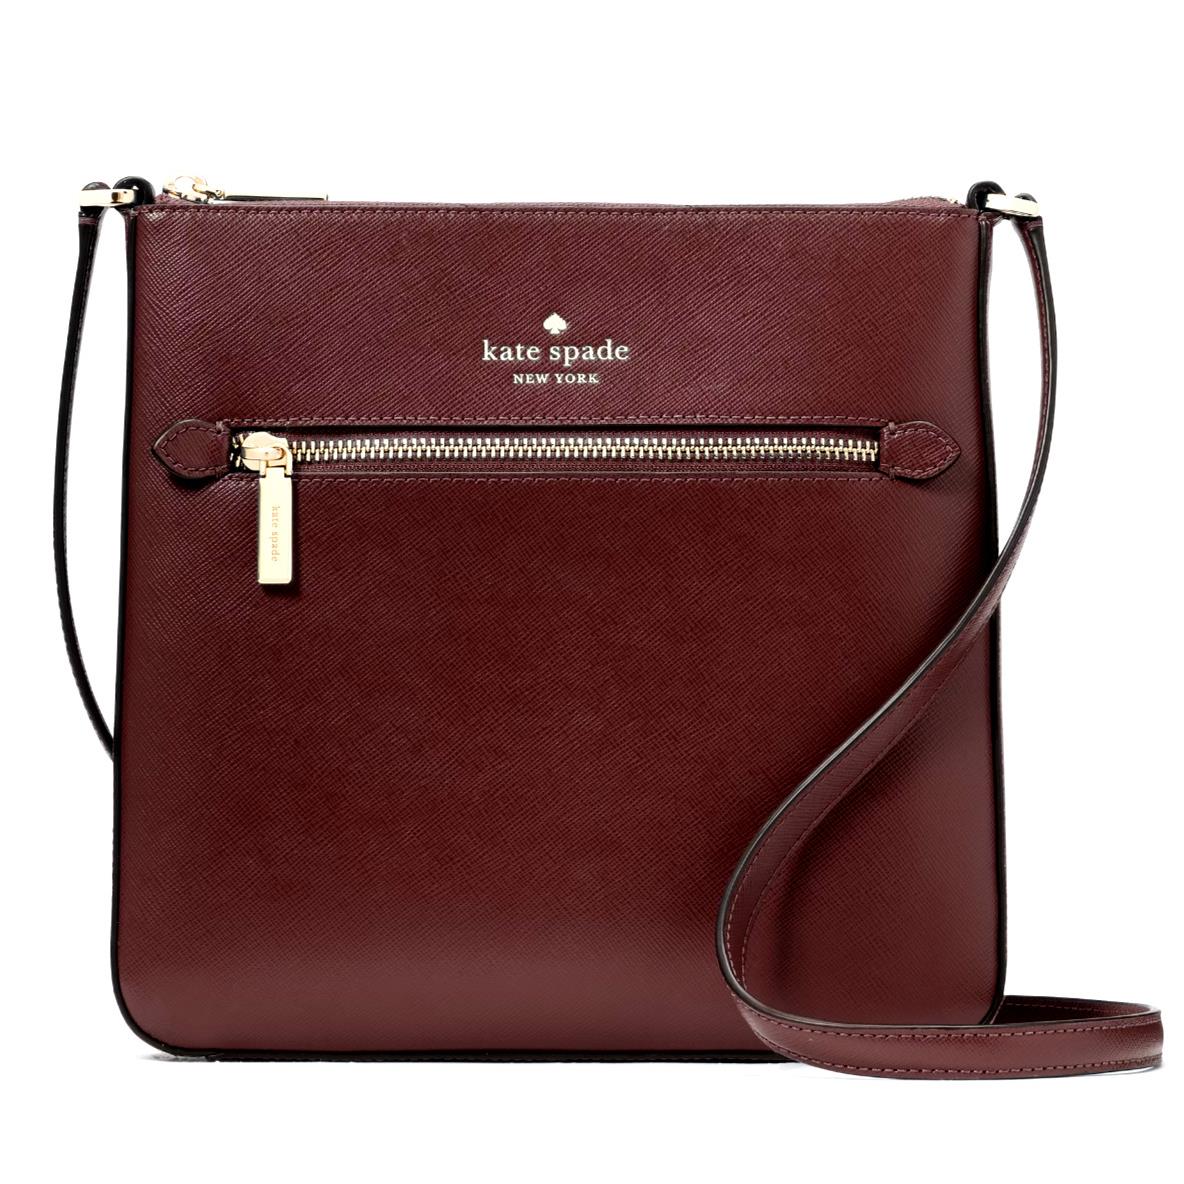 New Kate Spade Sadie North South Crossbody Grenache with Dust Bag